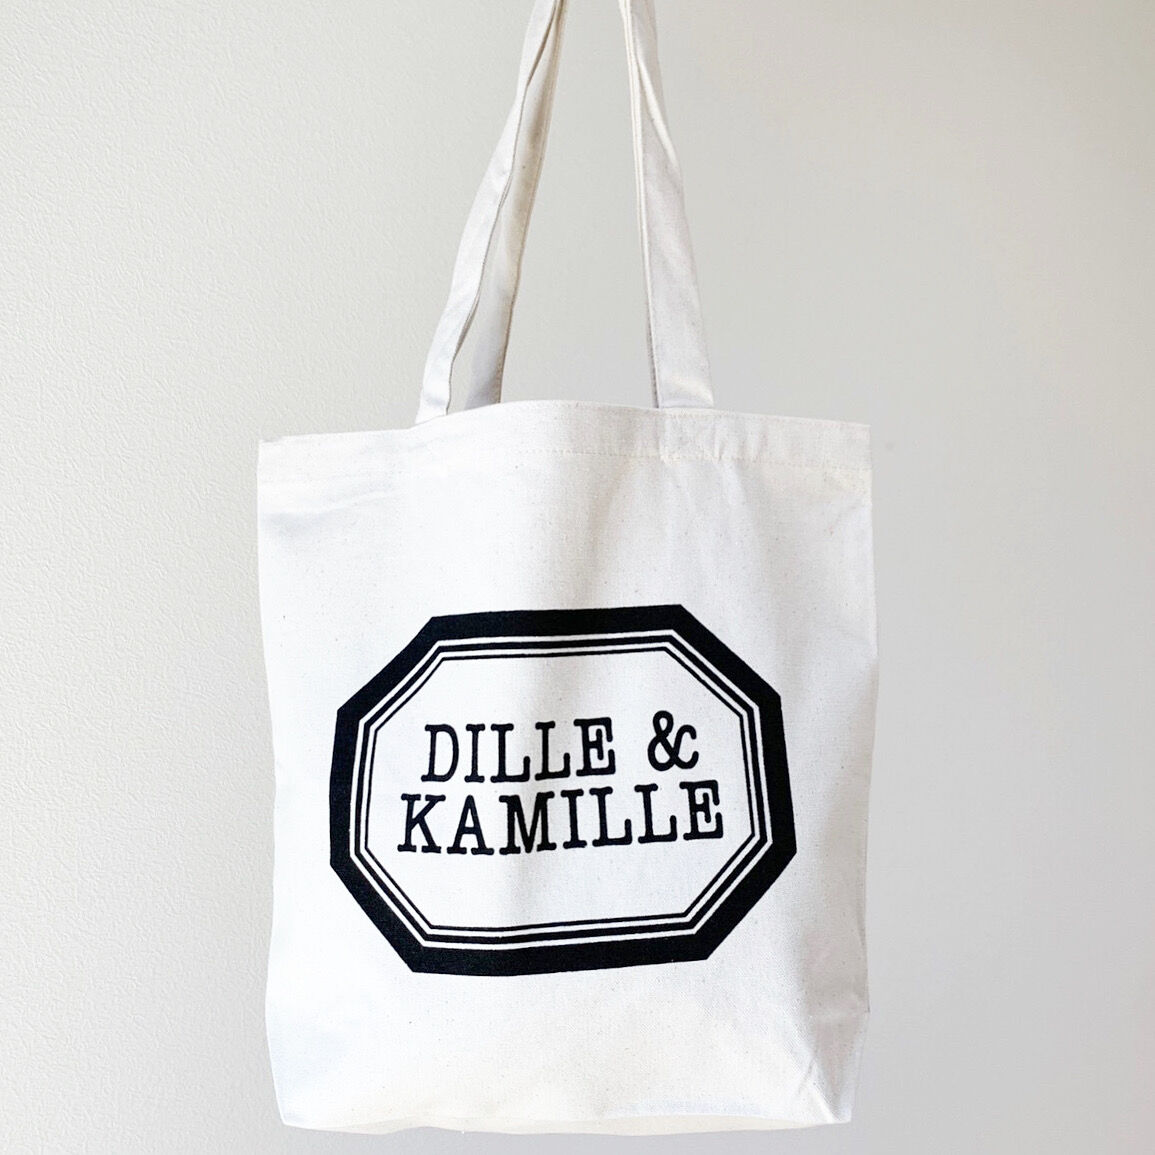 【Dille & Kamille】トートバッグ《小》 / Tote bag《Small》 |...